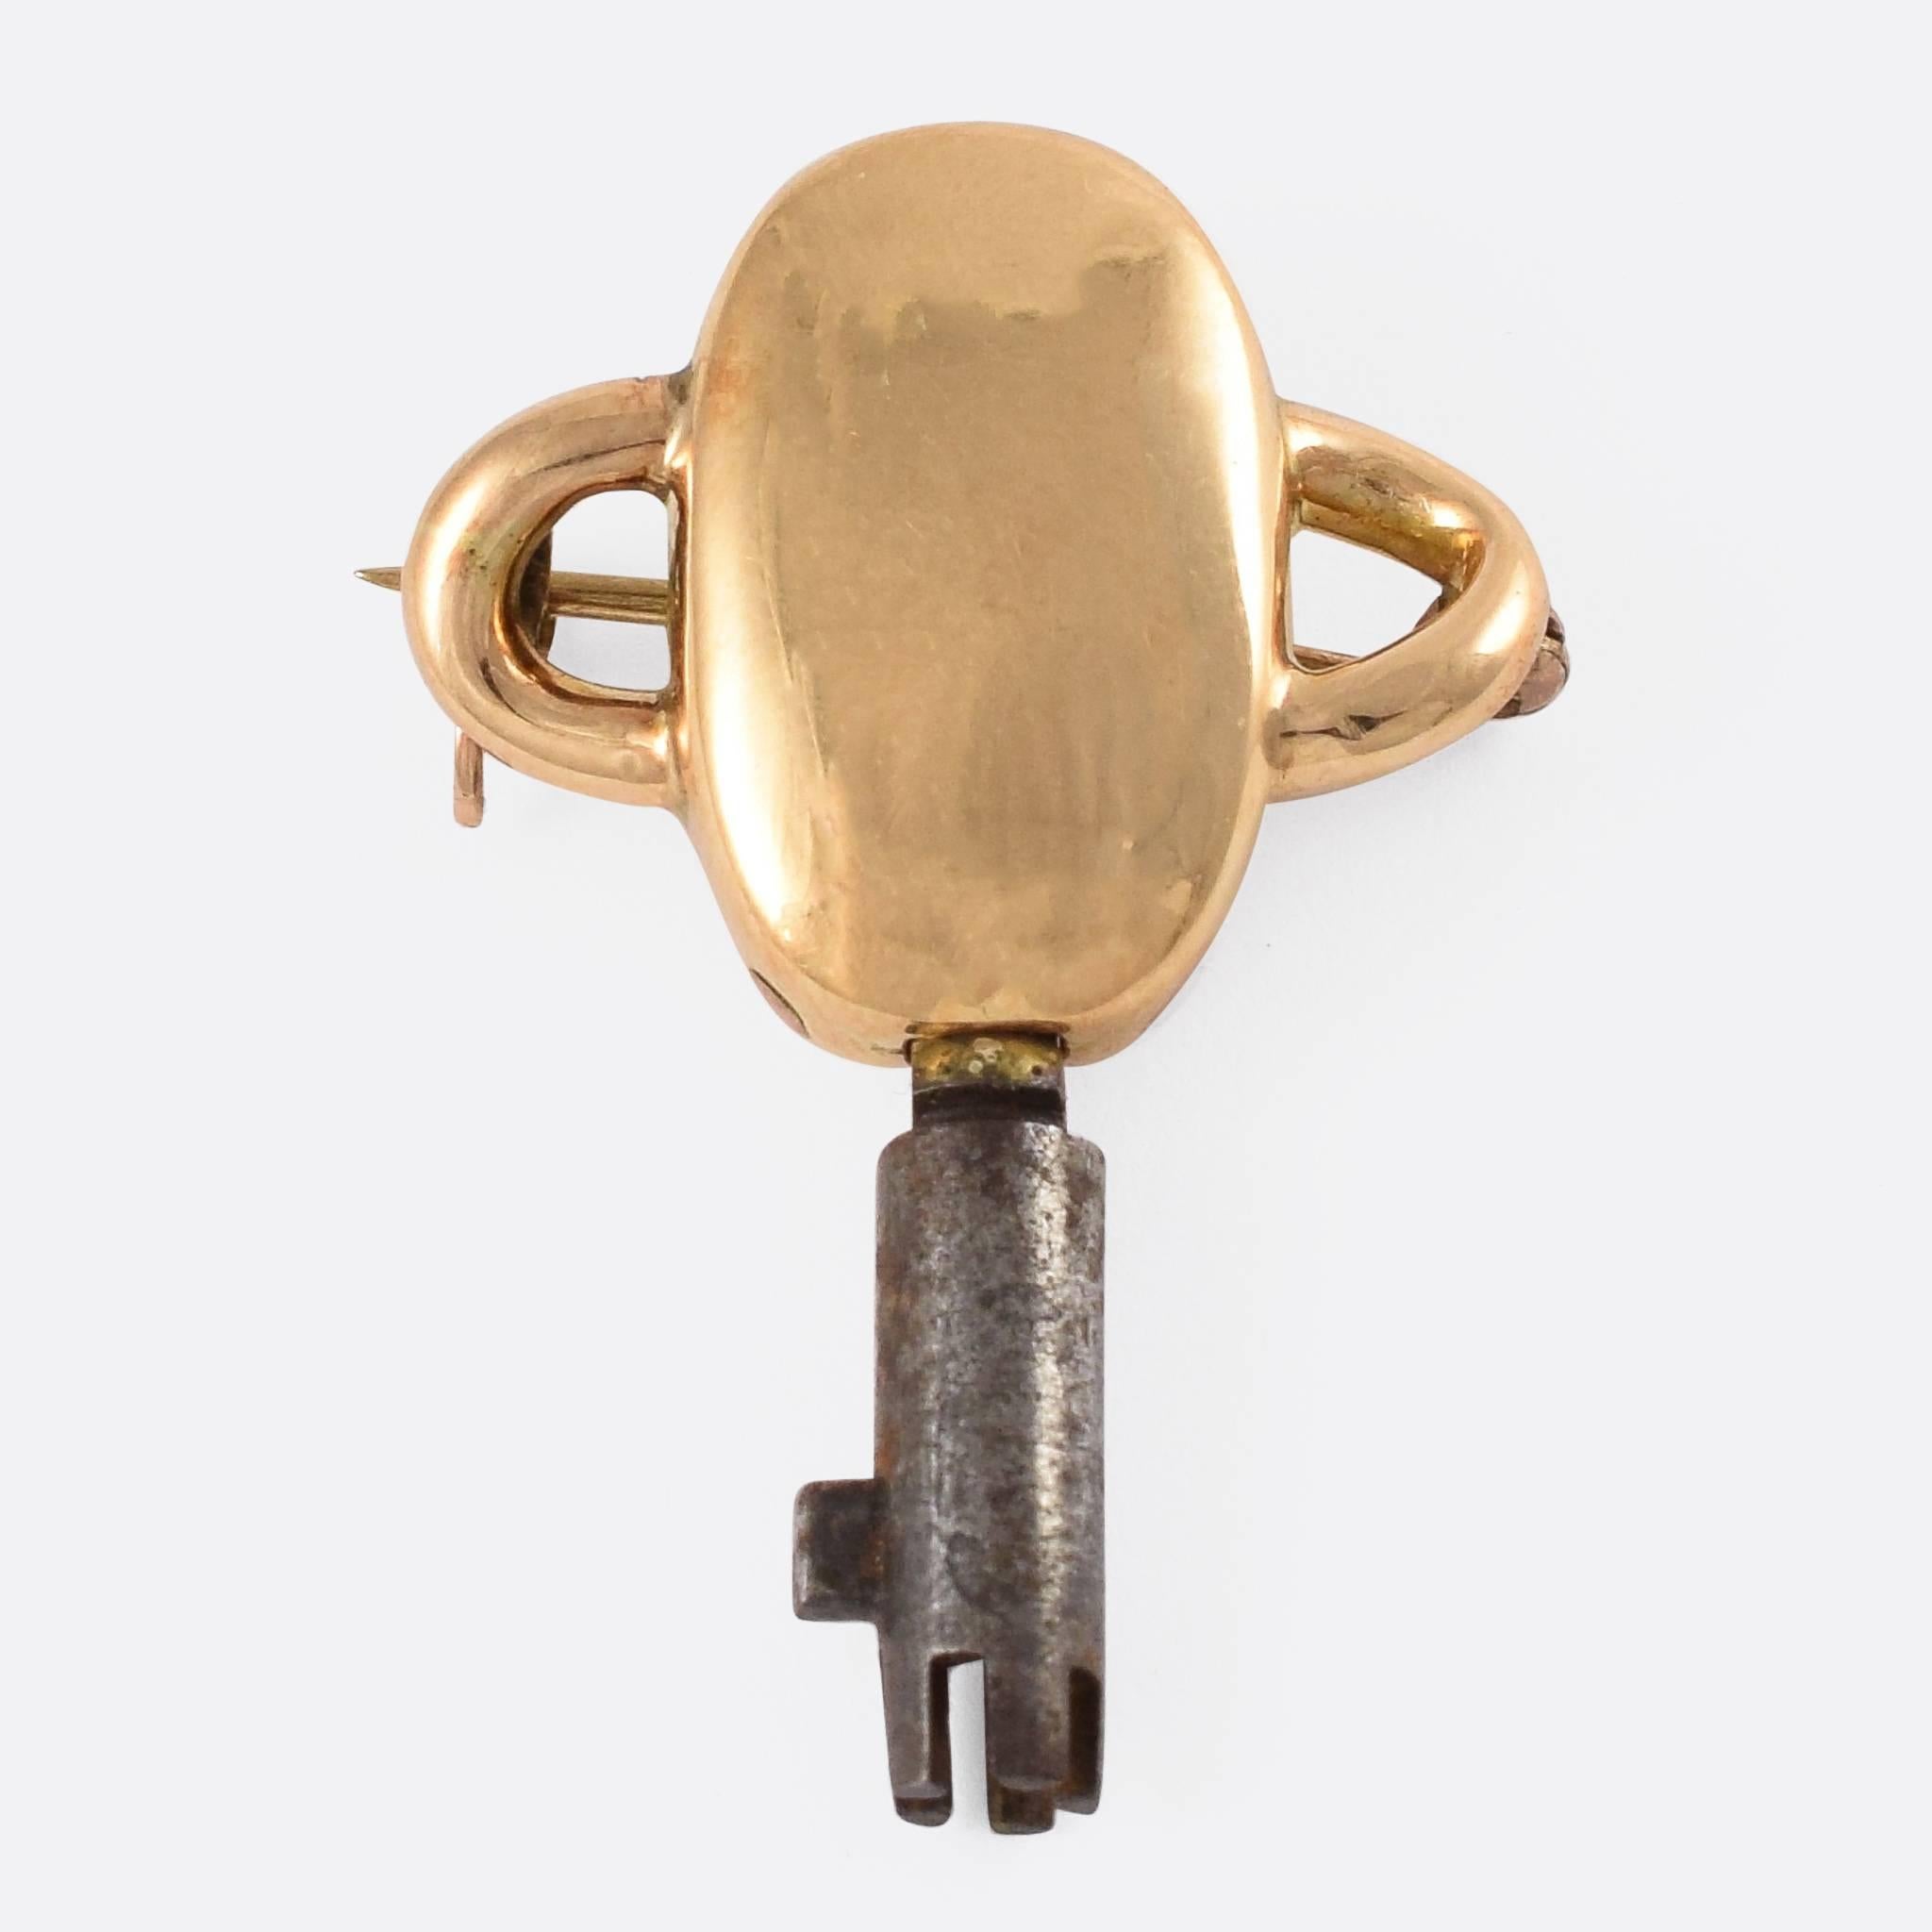 This unusual 15ct gold brooch dates to the mid-19th Century, and holds a special kind of key within. The Bramah lock was invented by Joseph Bramah in 1784, and features a cylindrical key design with five shafts at the end. It is now regarded as the